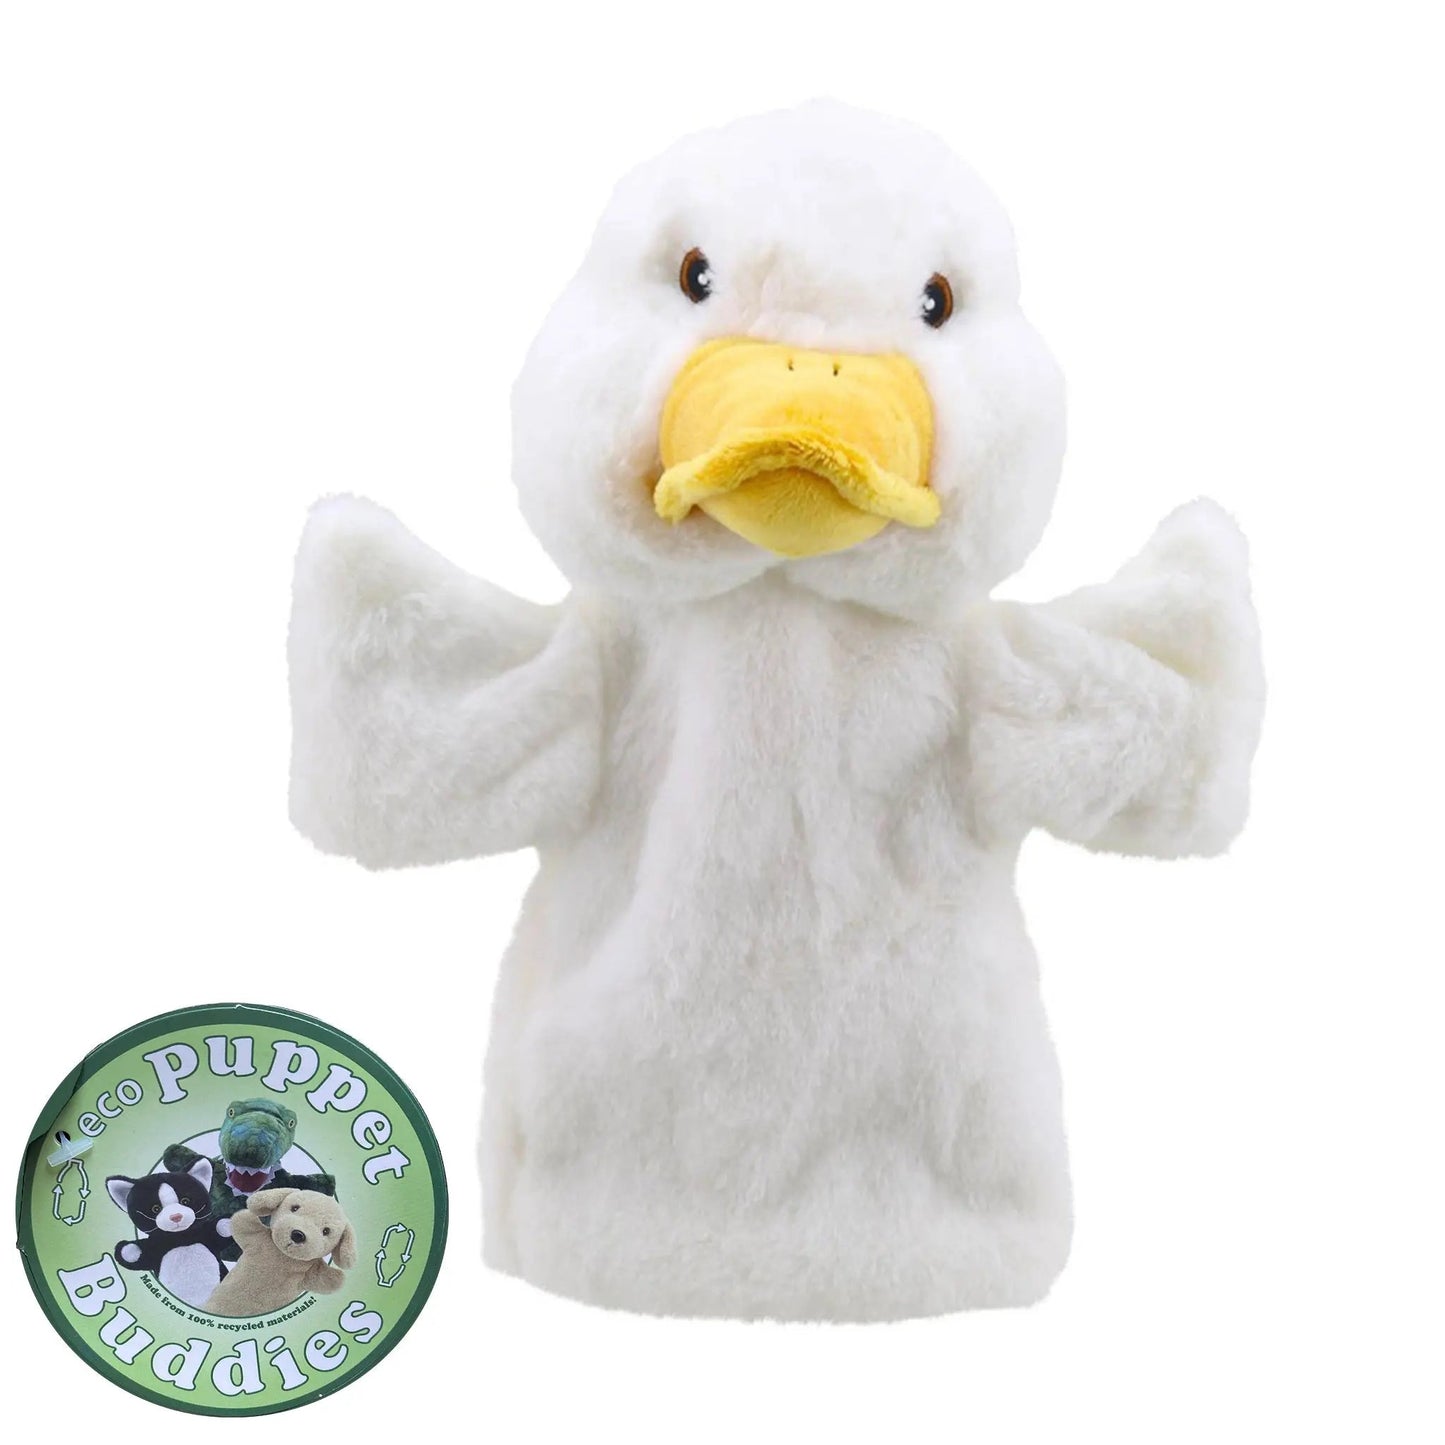 Duck Eco Puppet Buddies Hand Puppet - The Puppet Company - The Forgotten Toy Shop